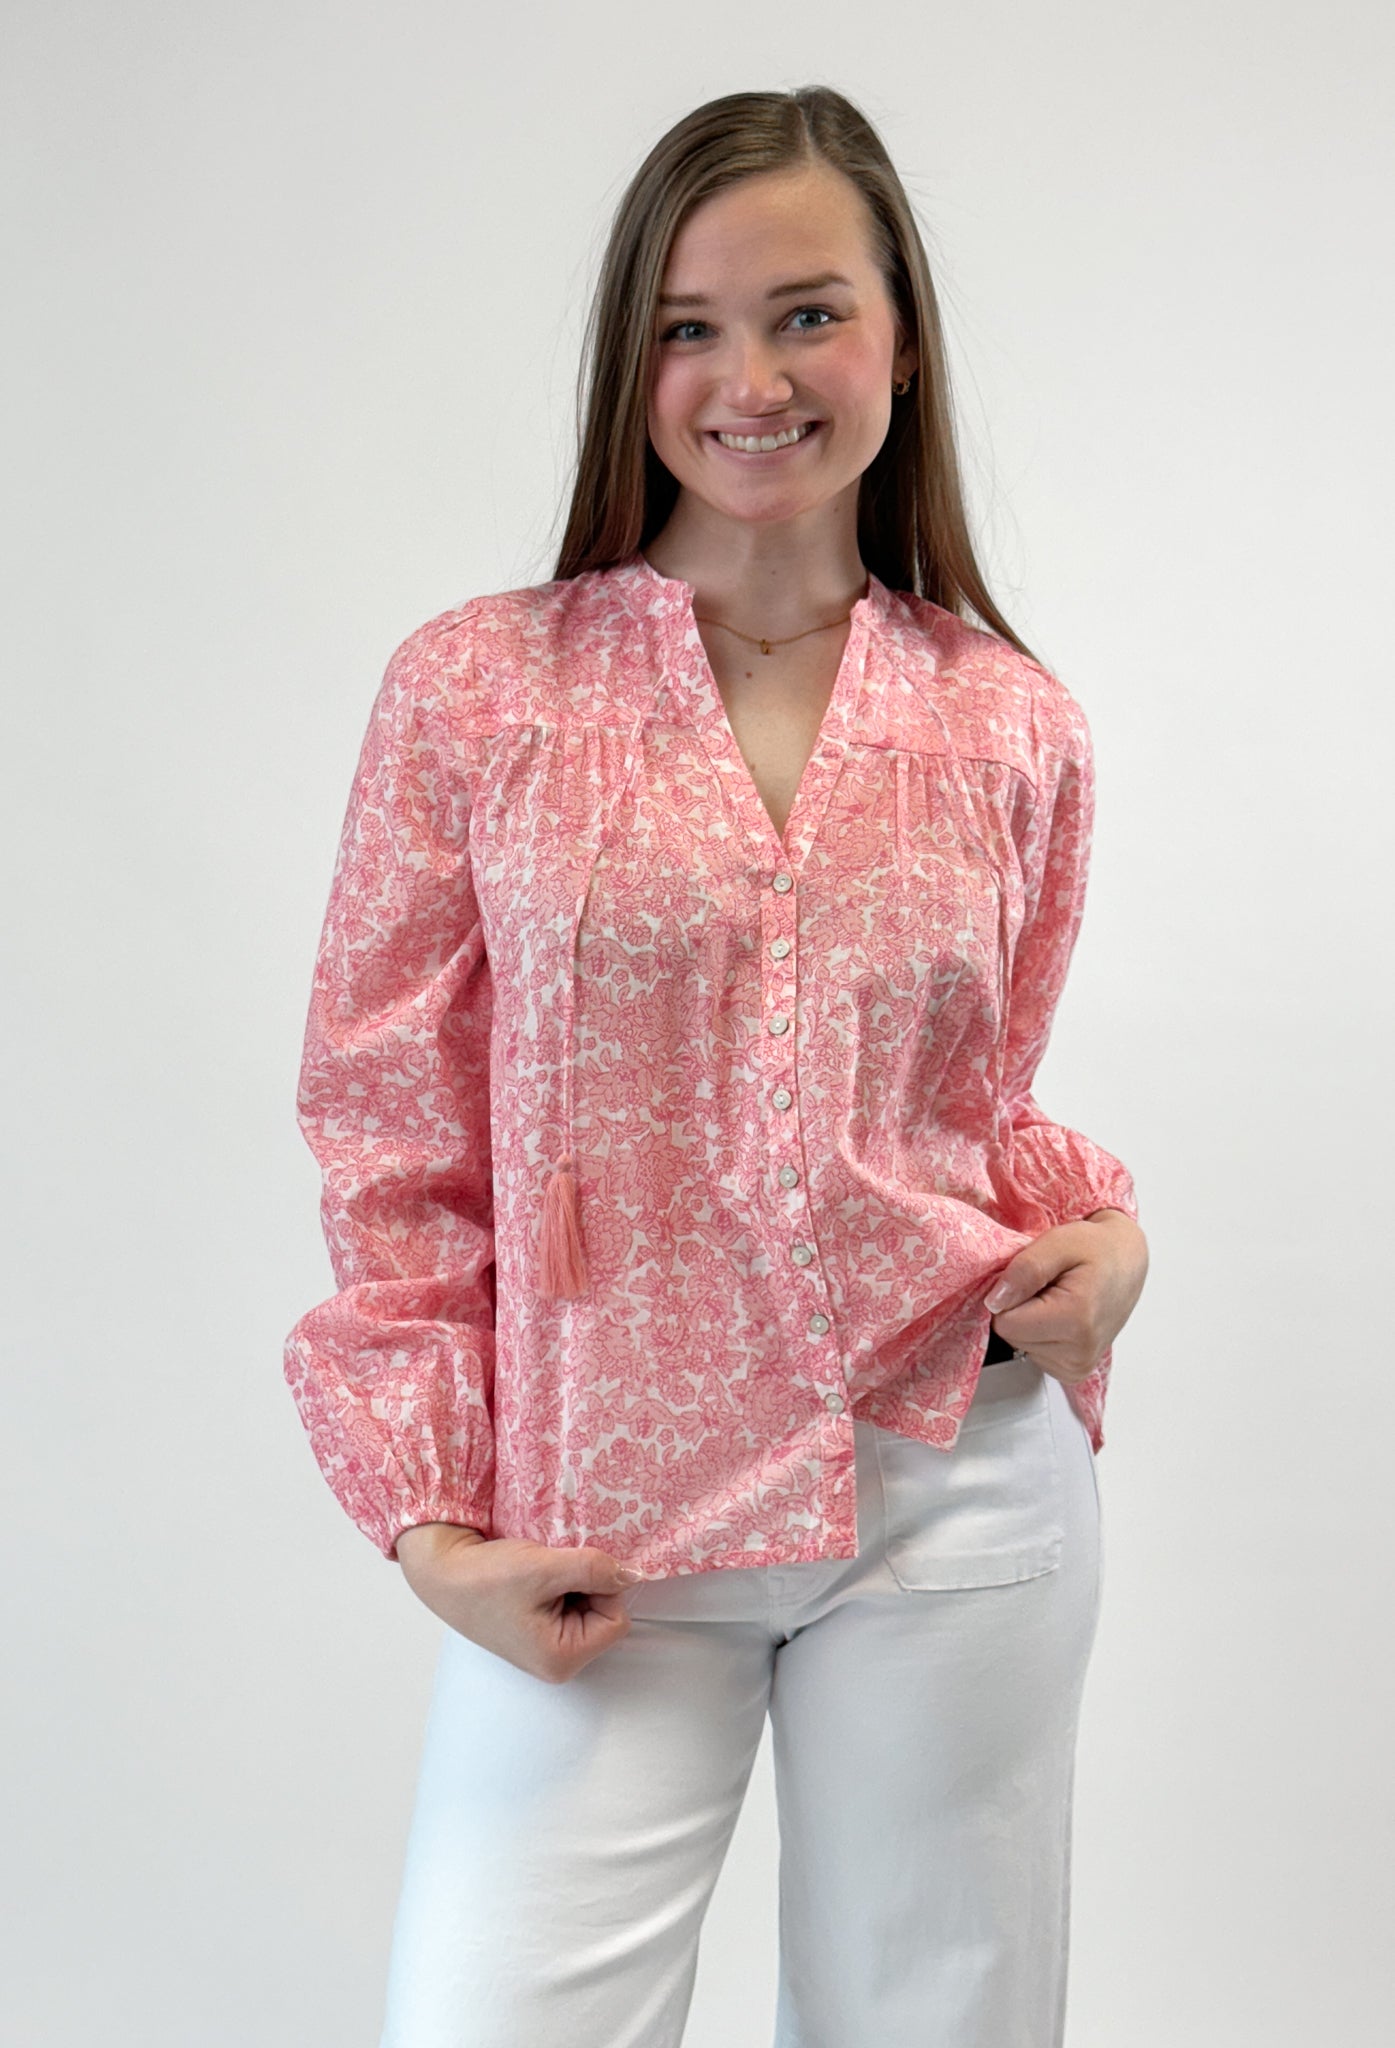 Long Sleeve Button Up Top